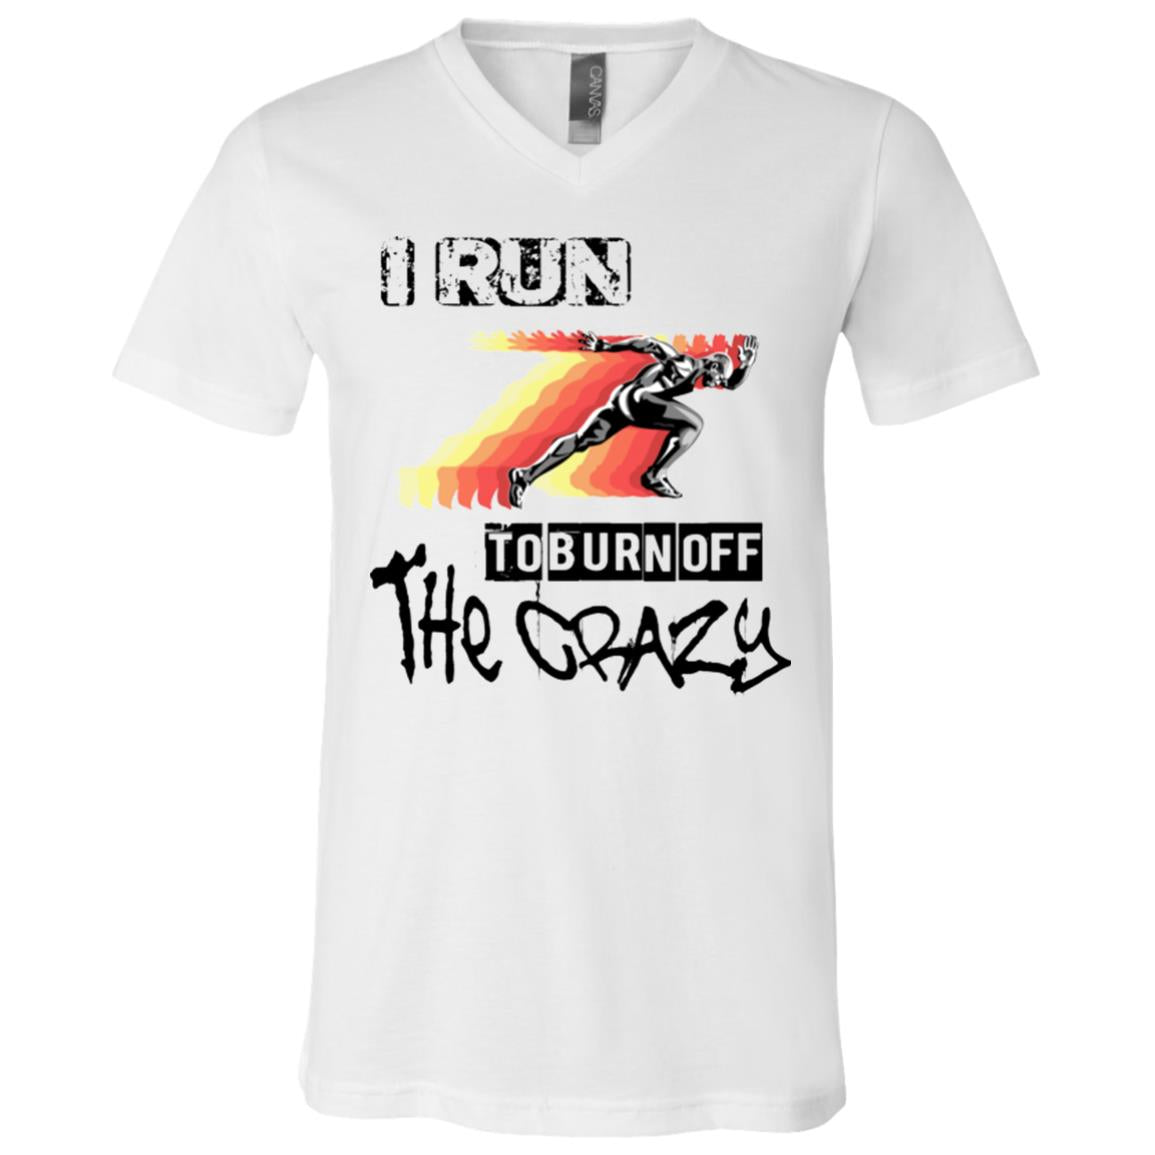 Running Shirt Run To Burn off the Crazy Unisex Tees - GoneBold.gift